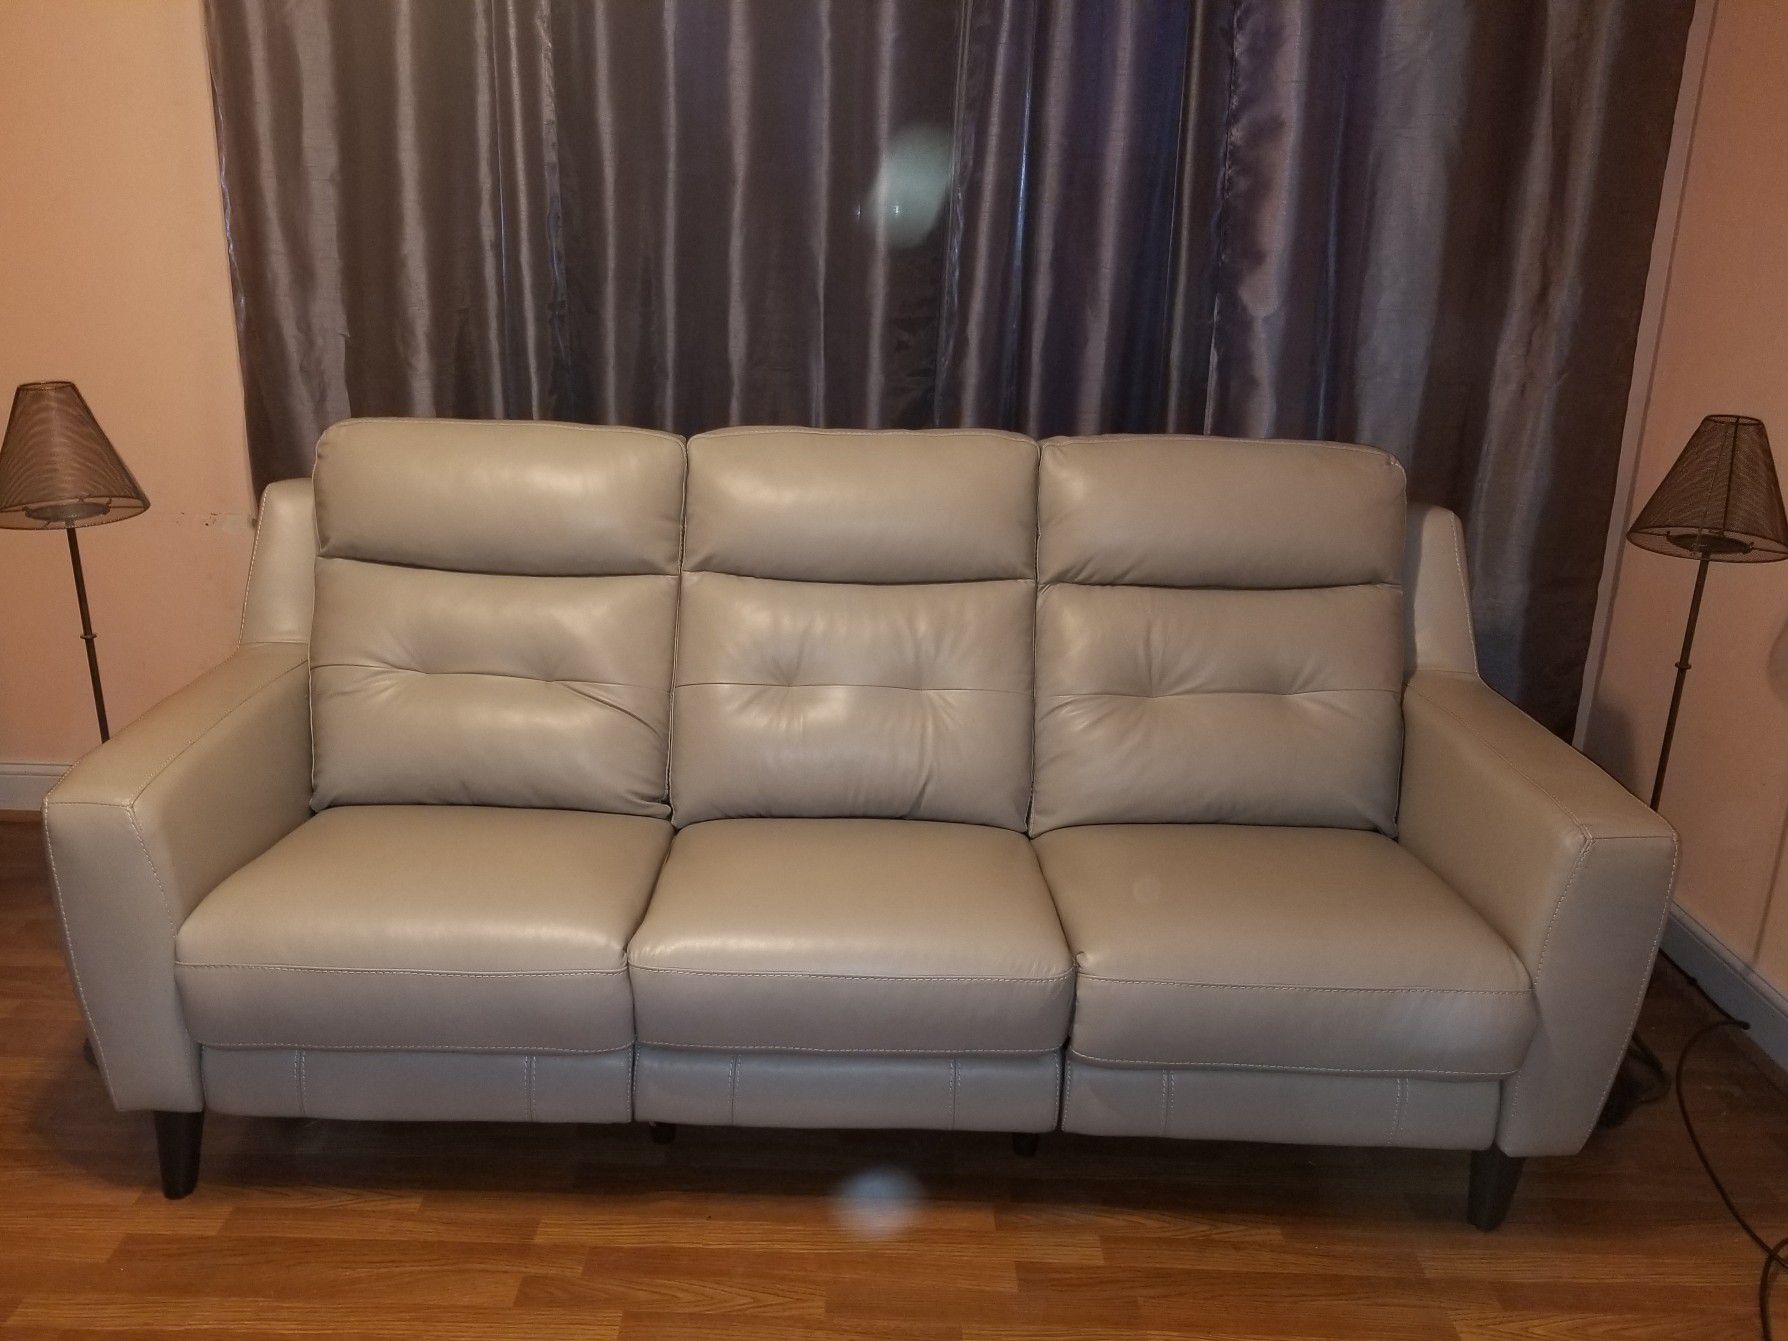 Leather Gray/Silver Power Recliner Sofa $975